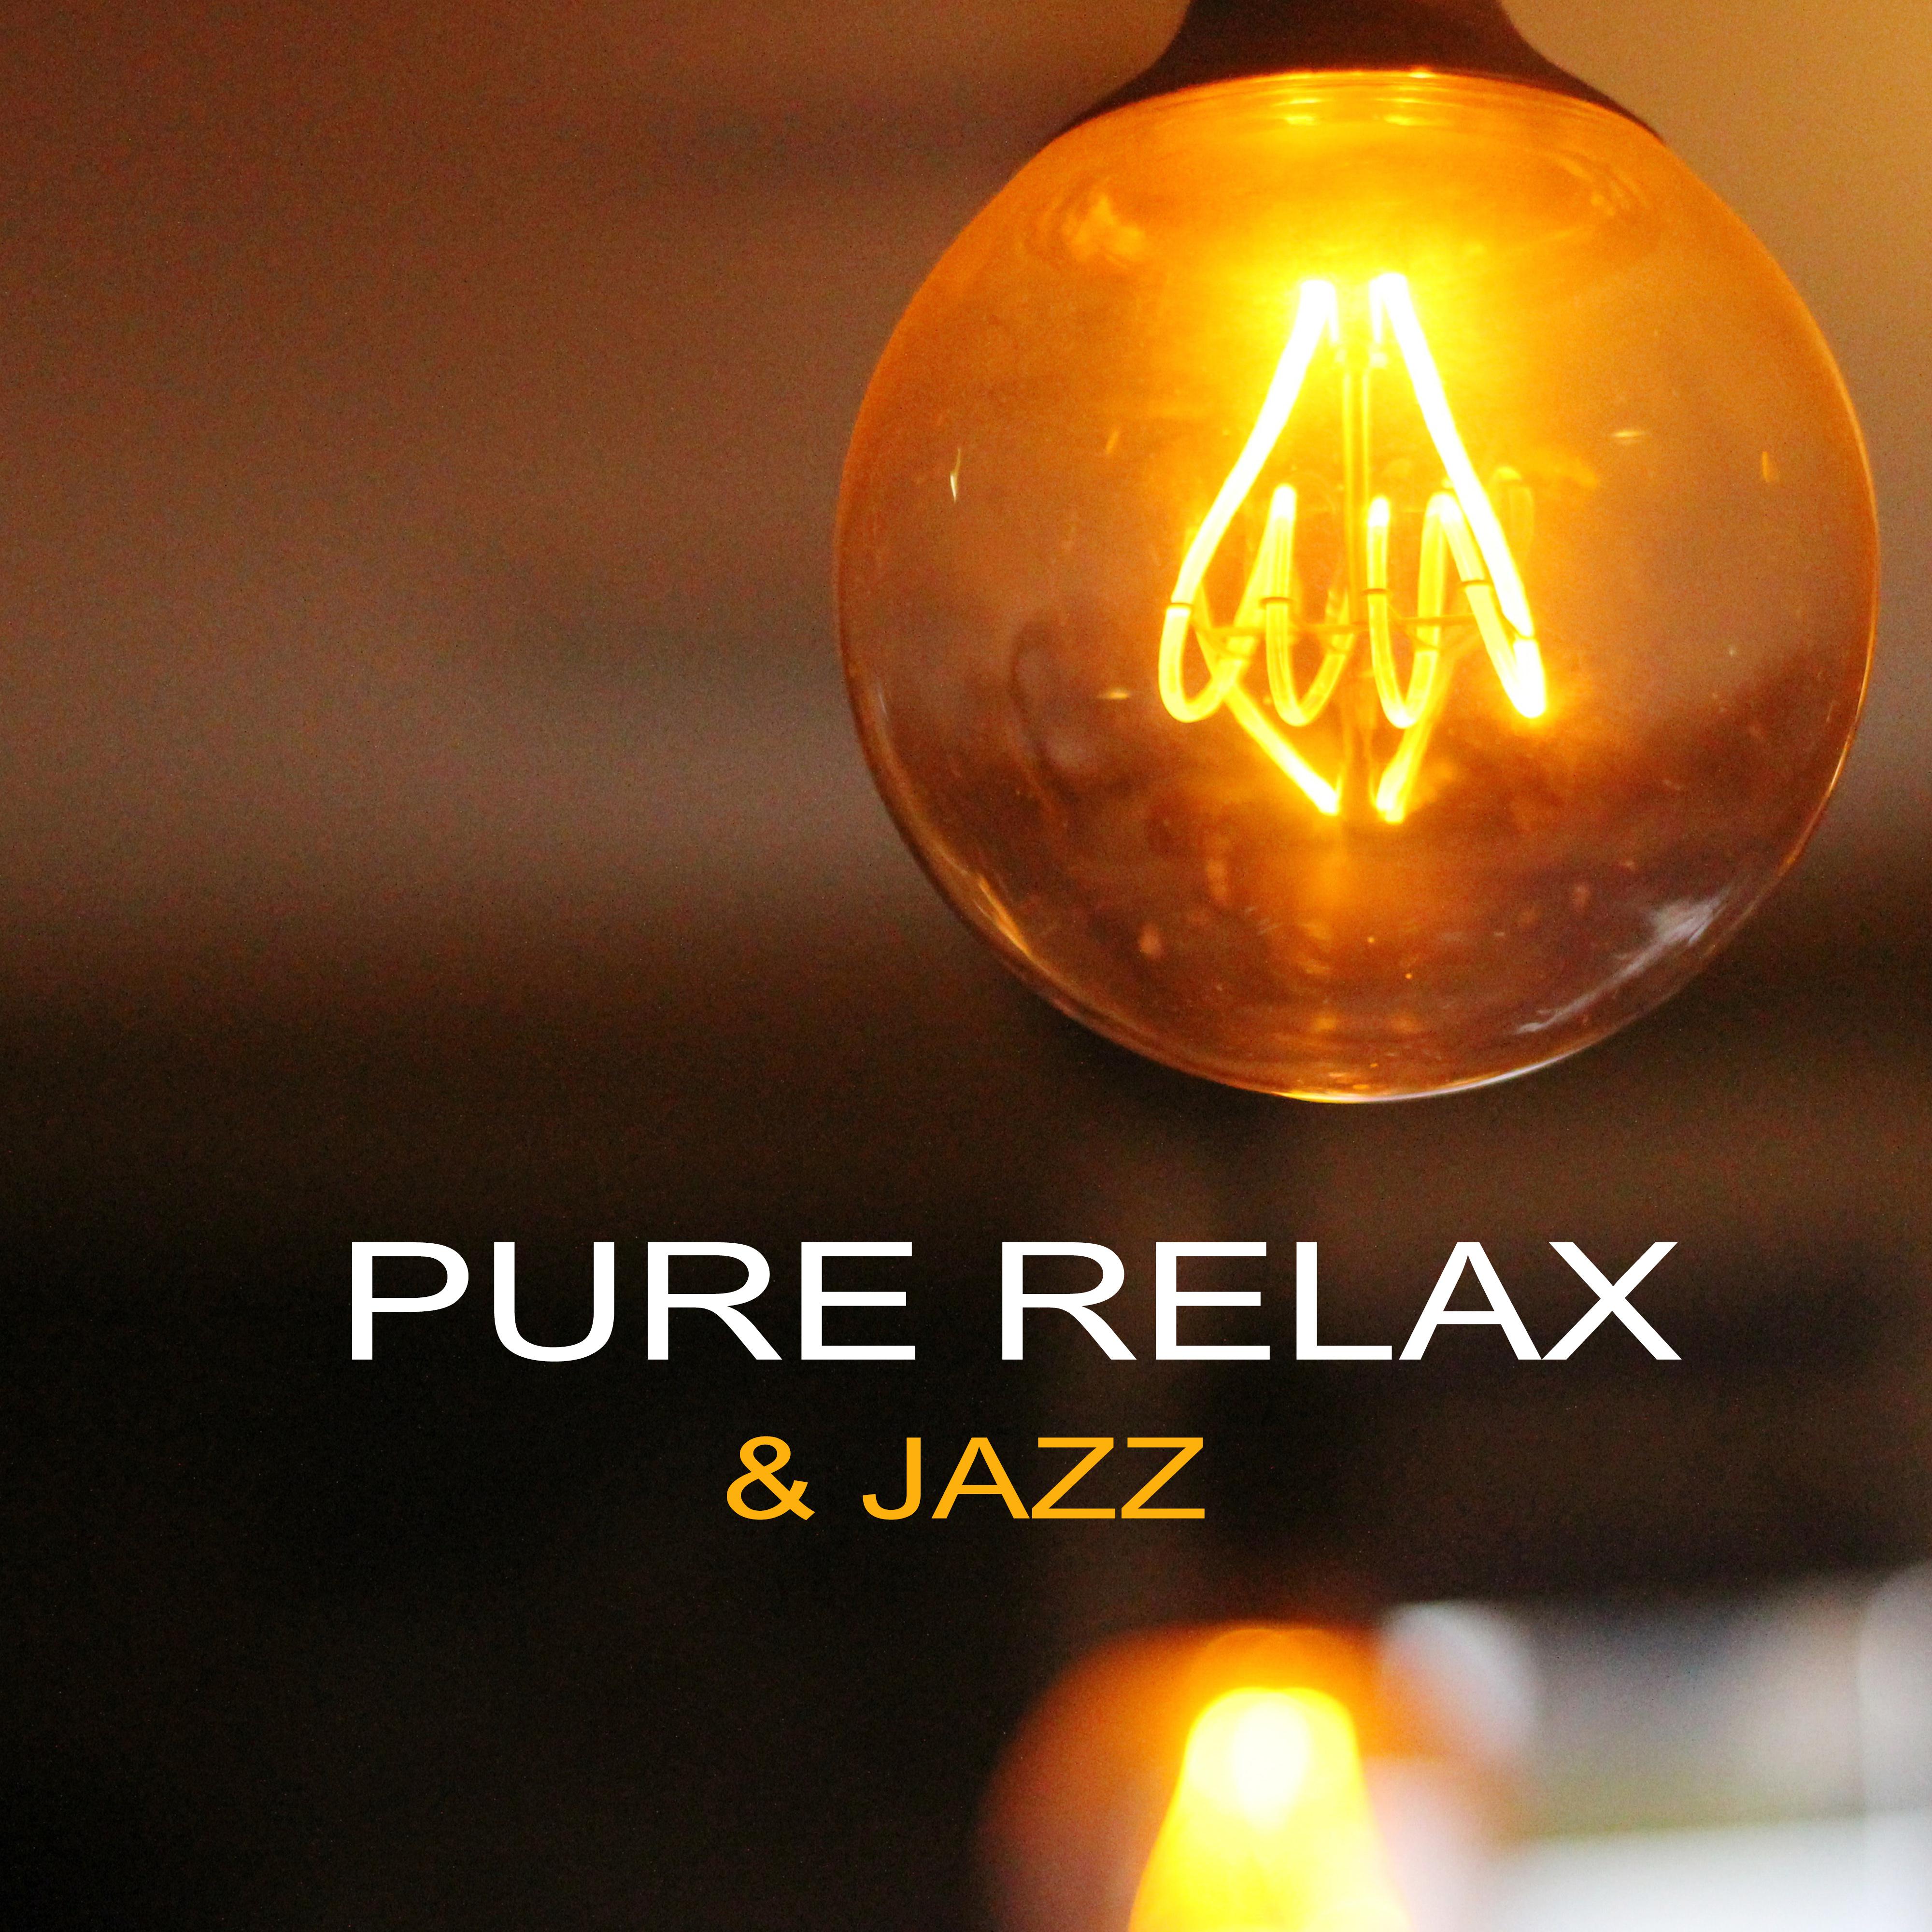 Pure Relax & Jazz